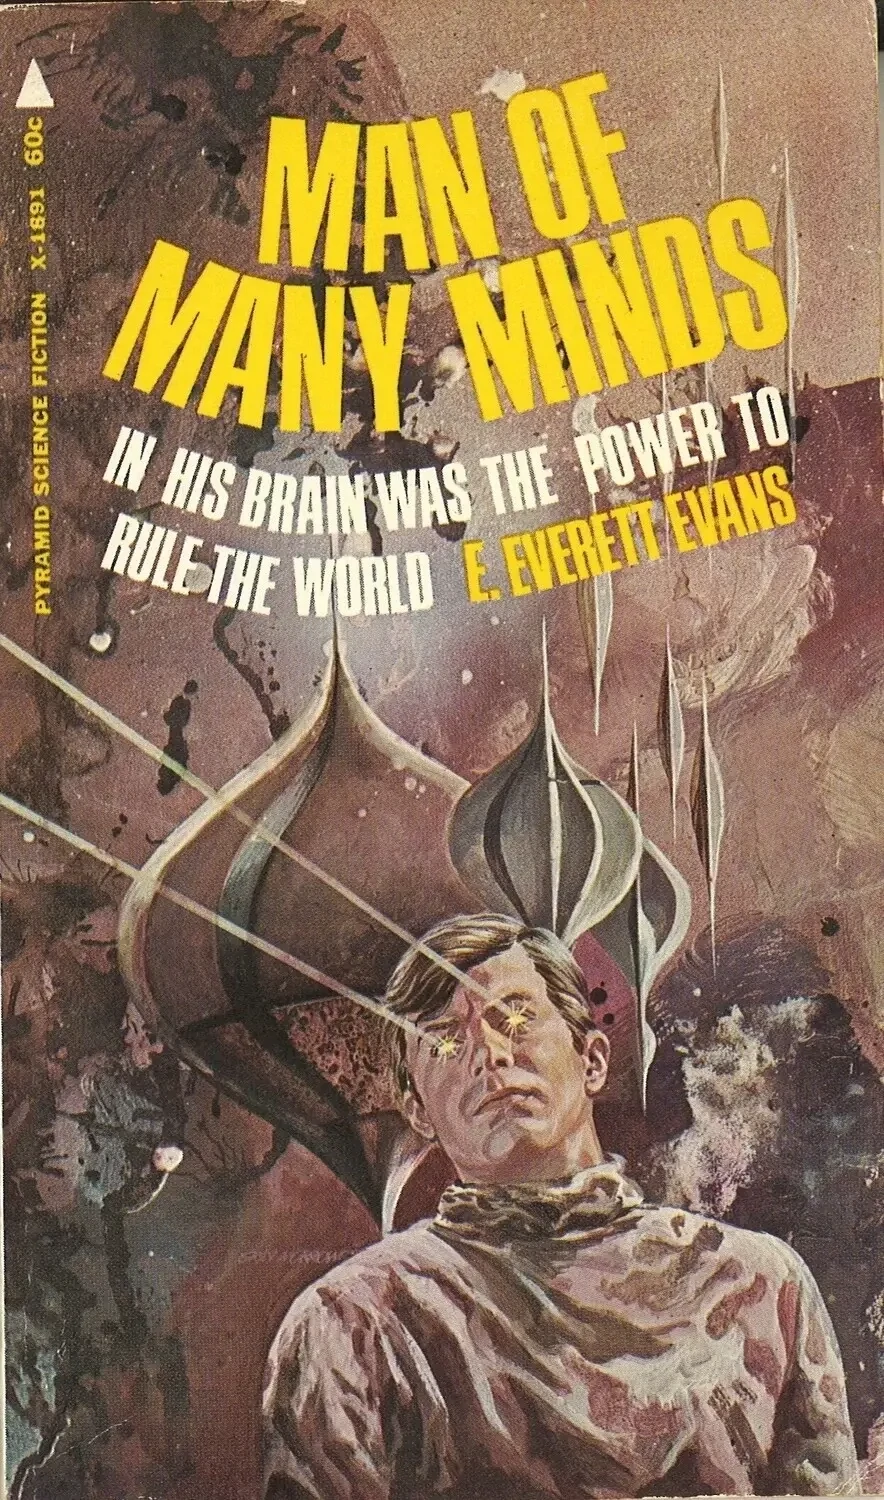 Man of Many Minds by E. Everett Evans